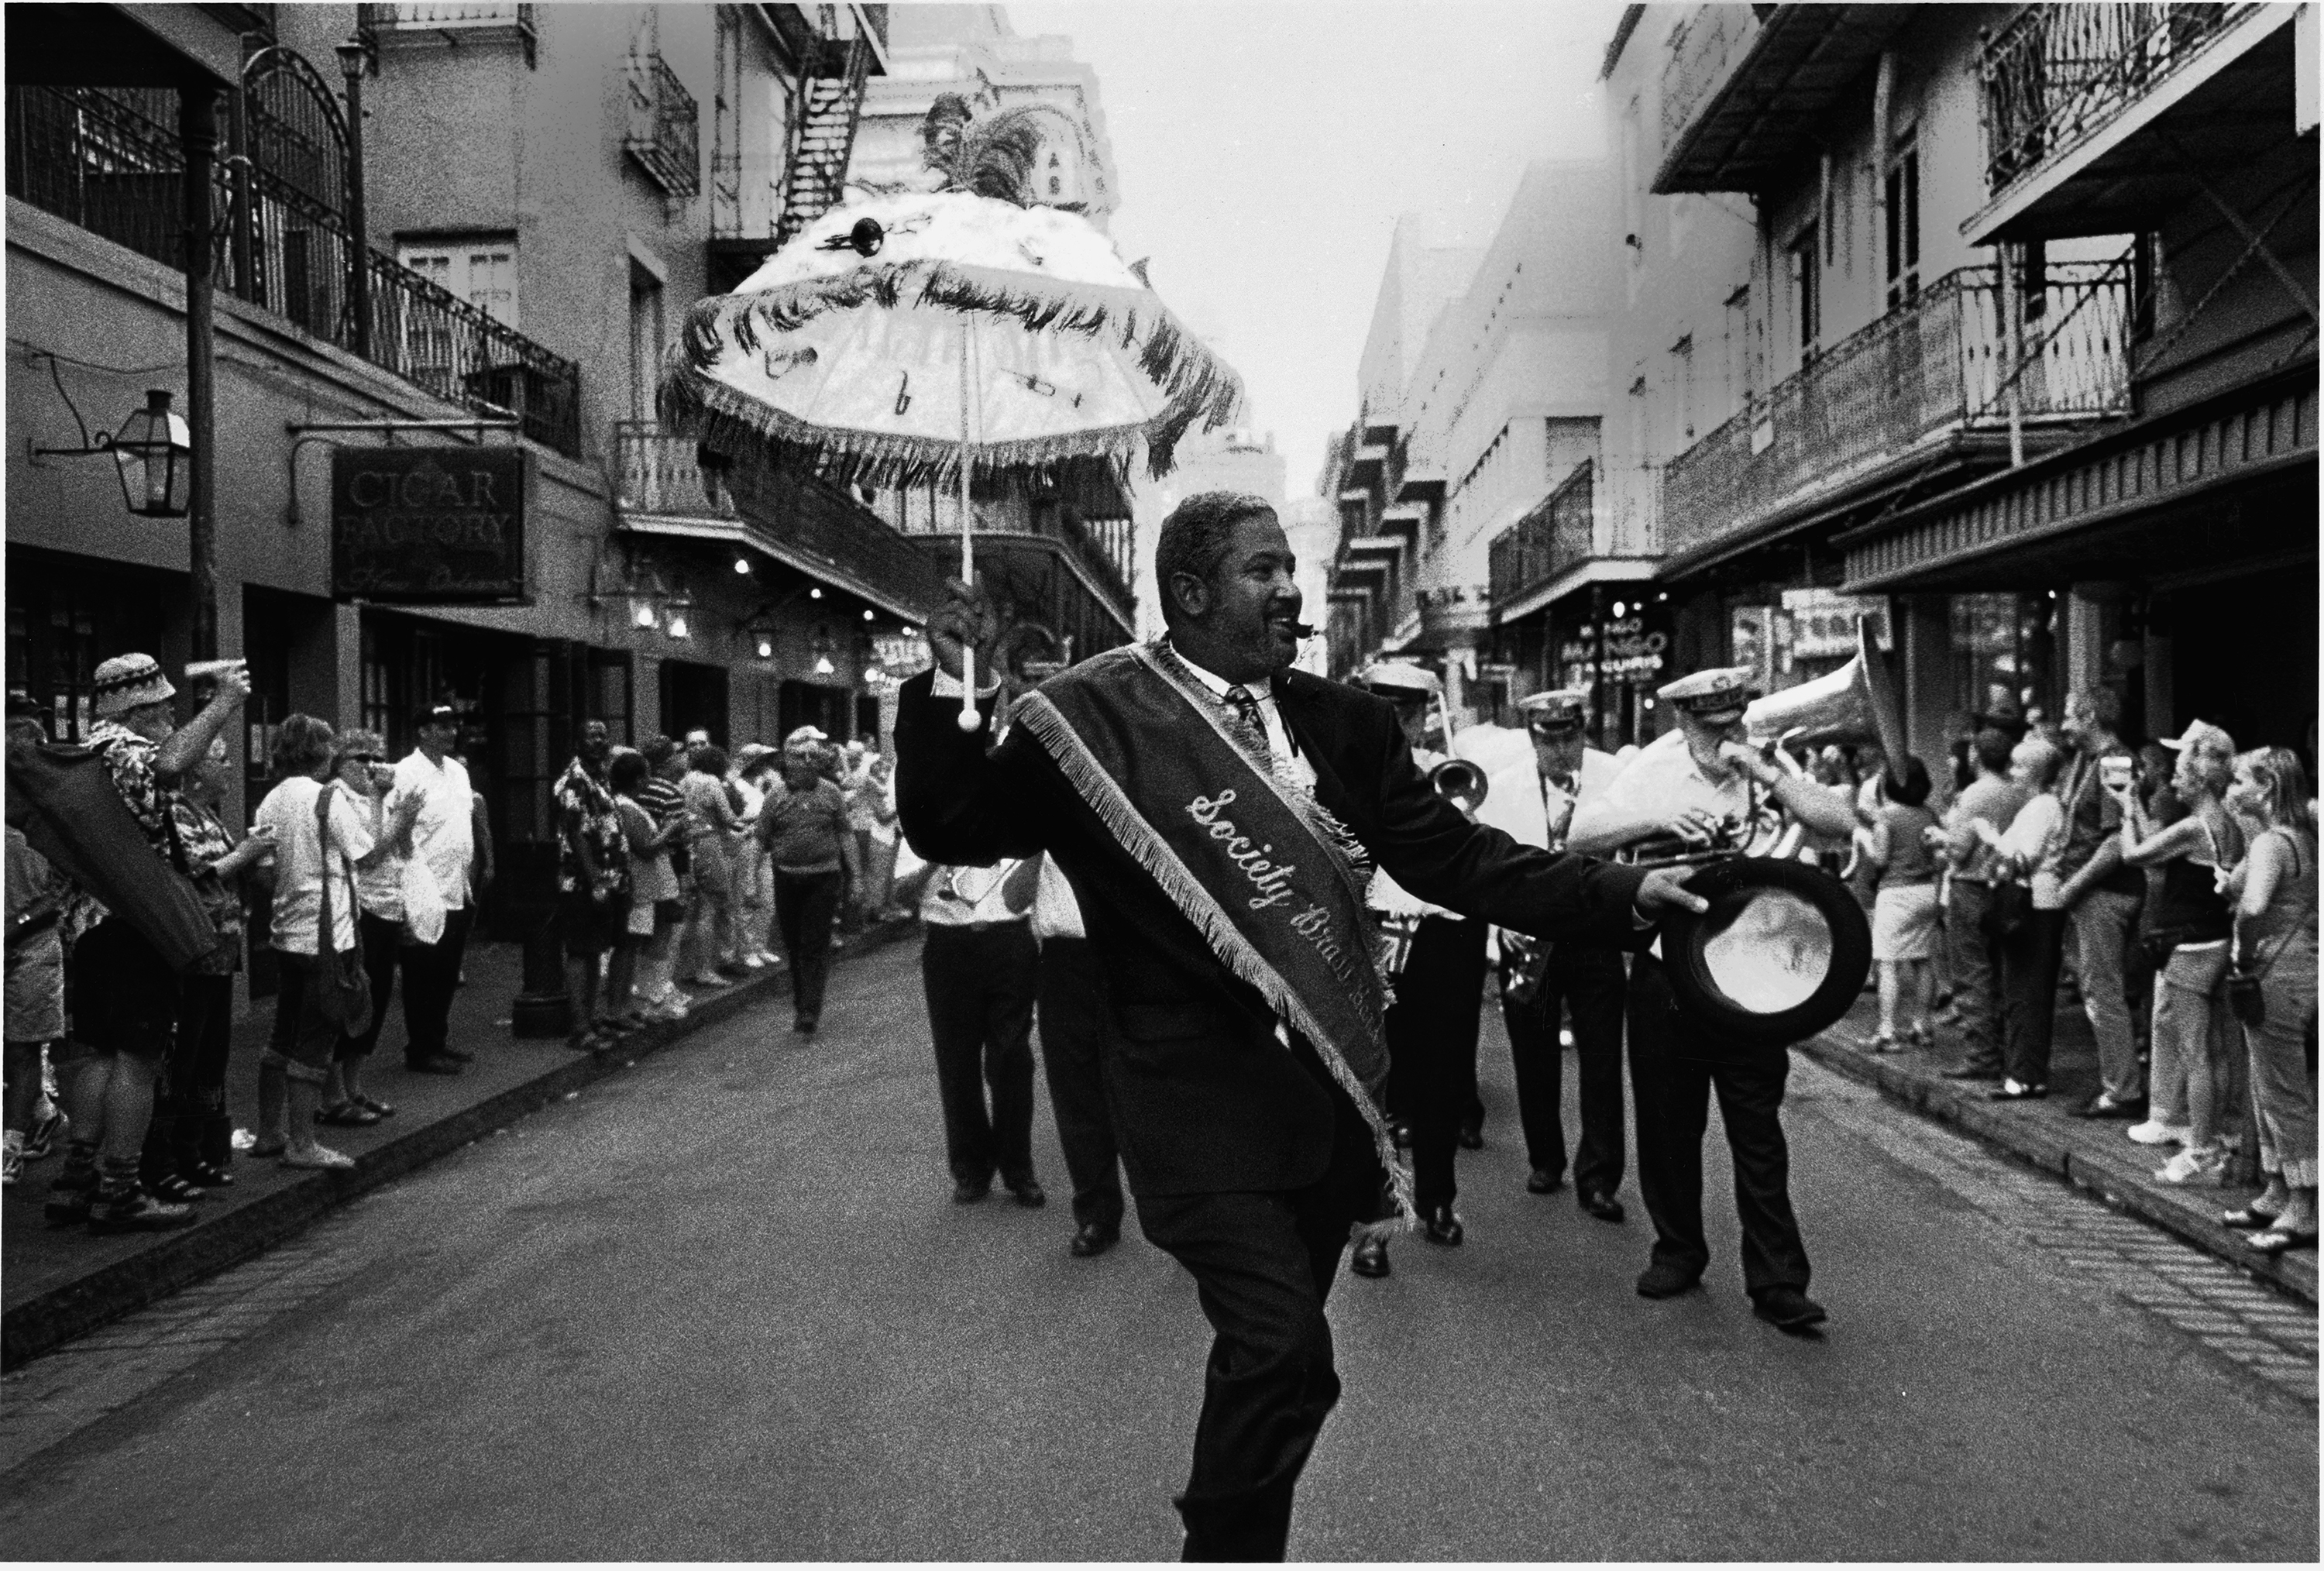 An image from Jules Allen's new book, "Marching Bands."